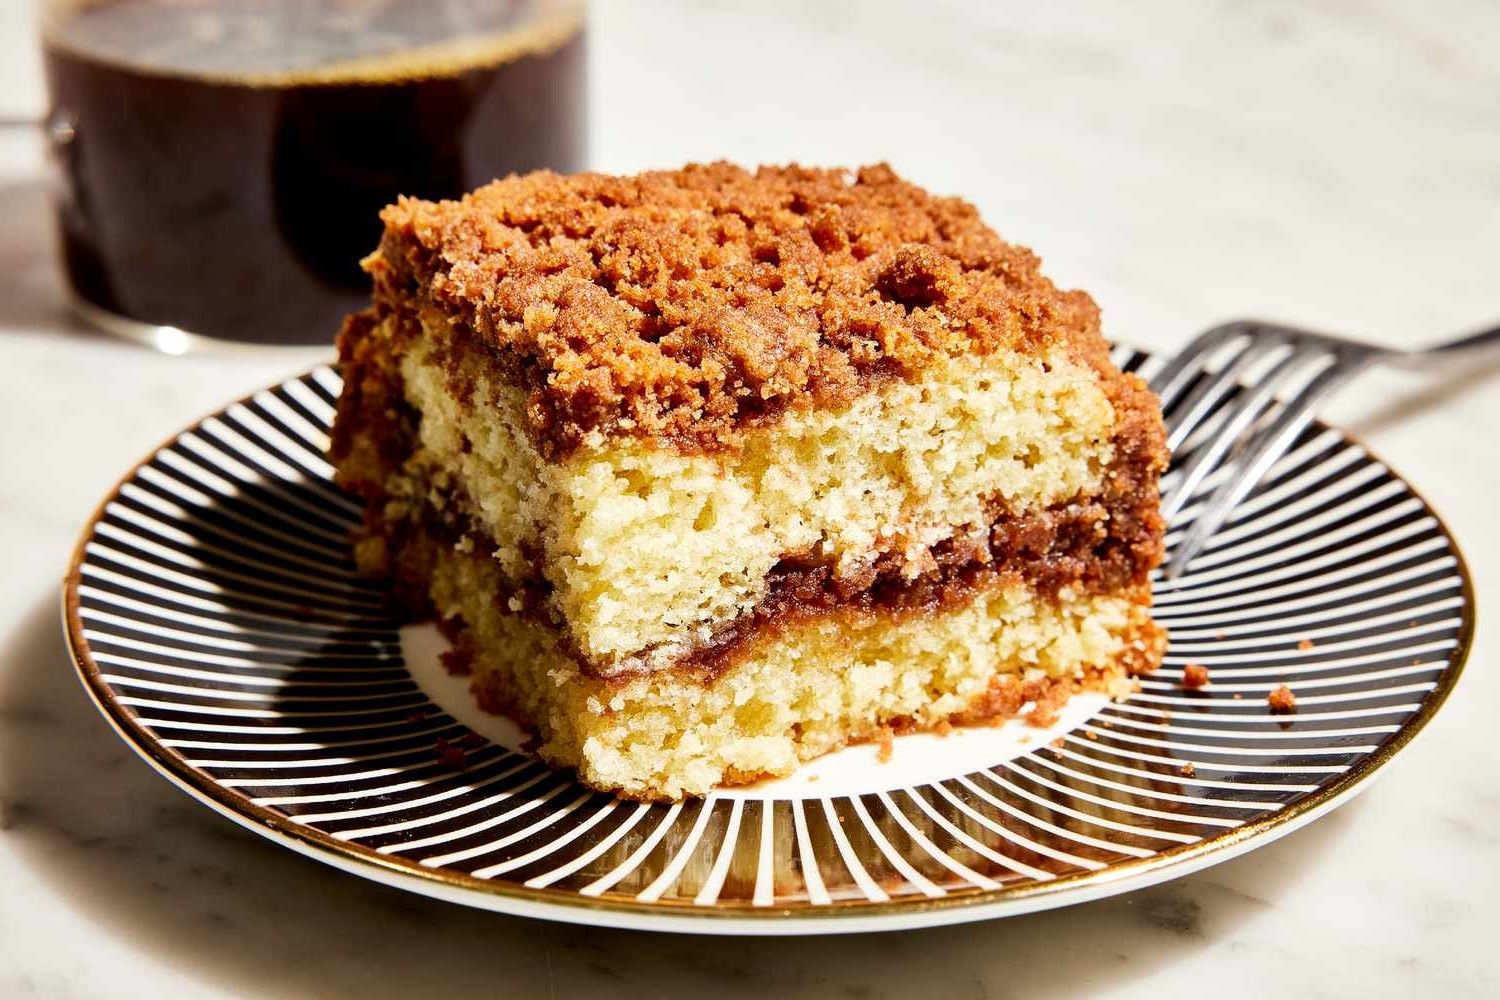 8-facts-about-national-coffee-cake-day-april-7th